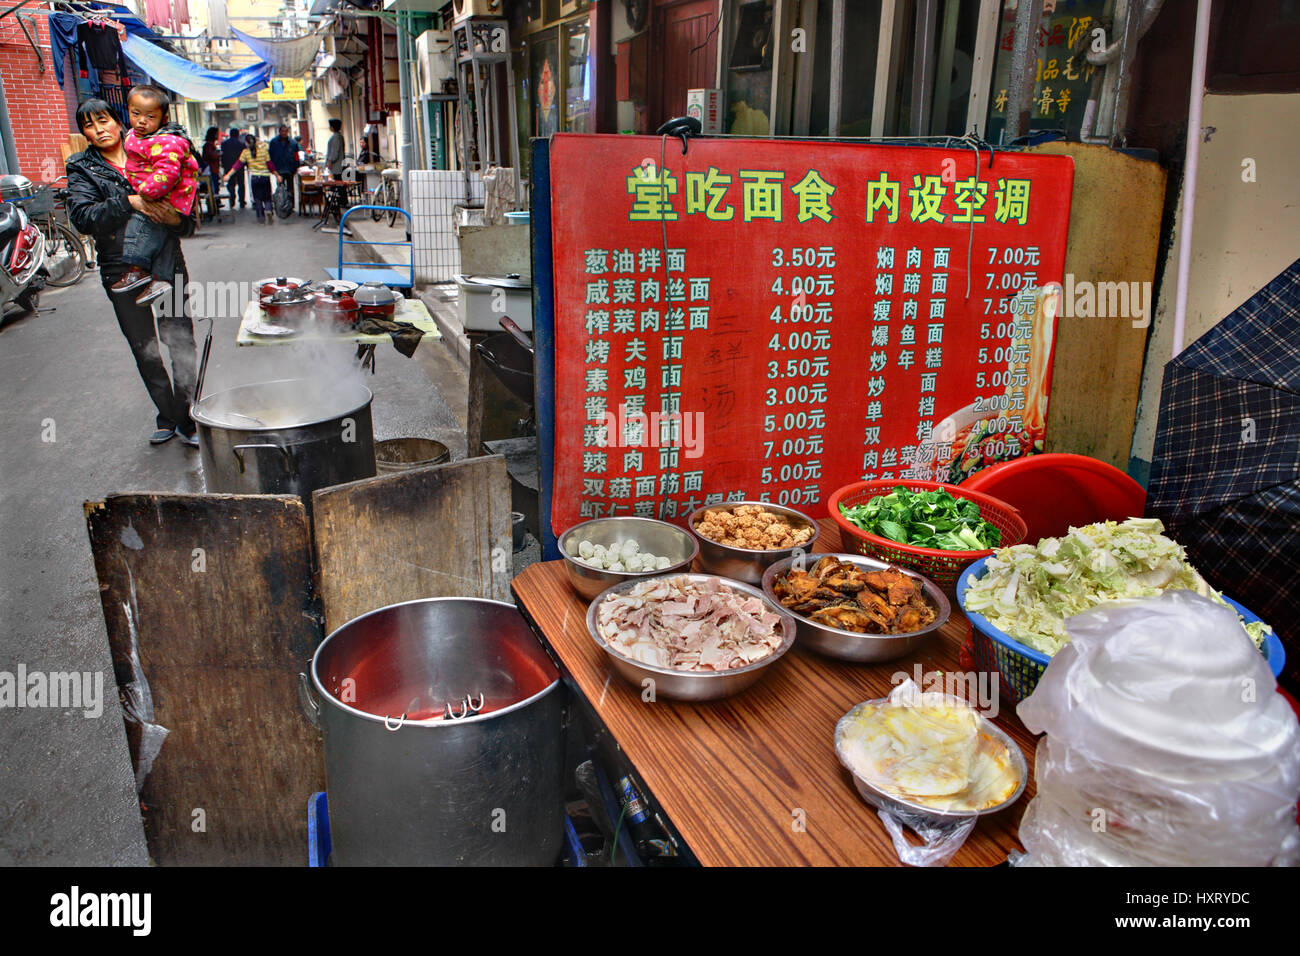 Shanghai, China - April 20, 2010: pricelist in cheap outdoor eatery in Shanghai, food services outdoors on Chinese street, street trade with tray Stock Photo